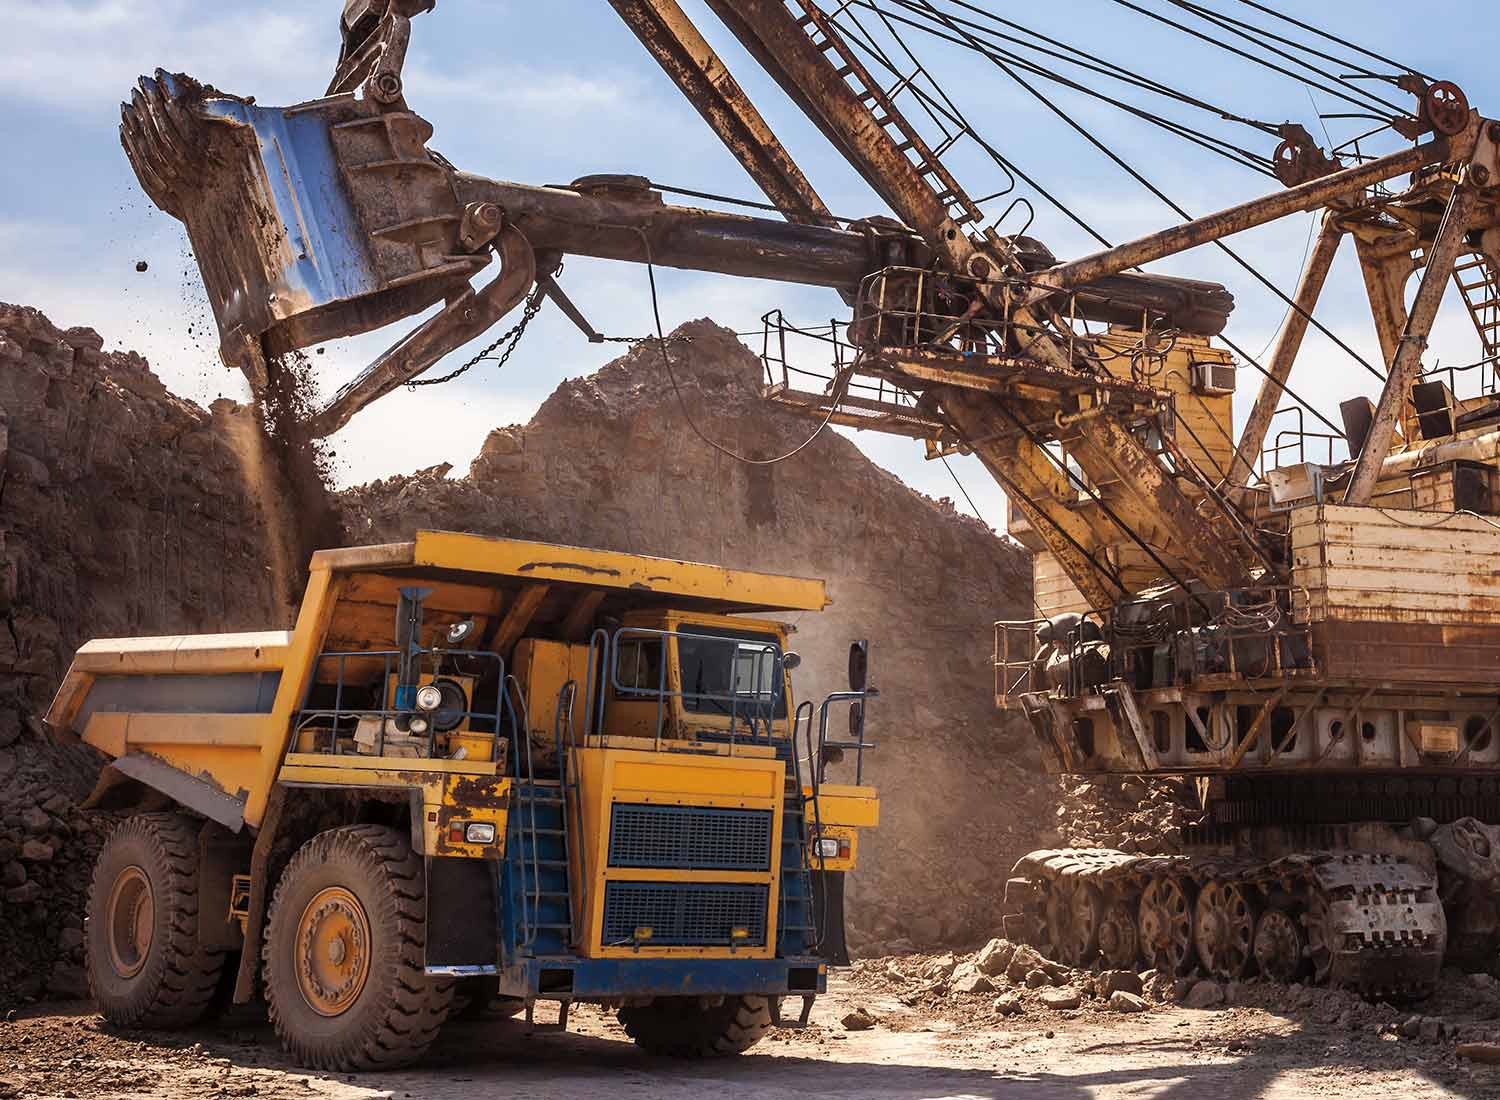 Heavy machinery at a mining site image